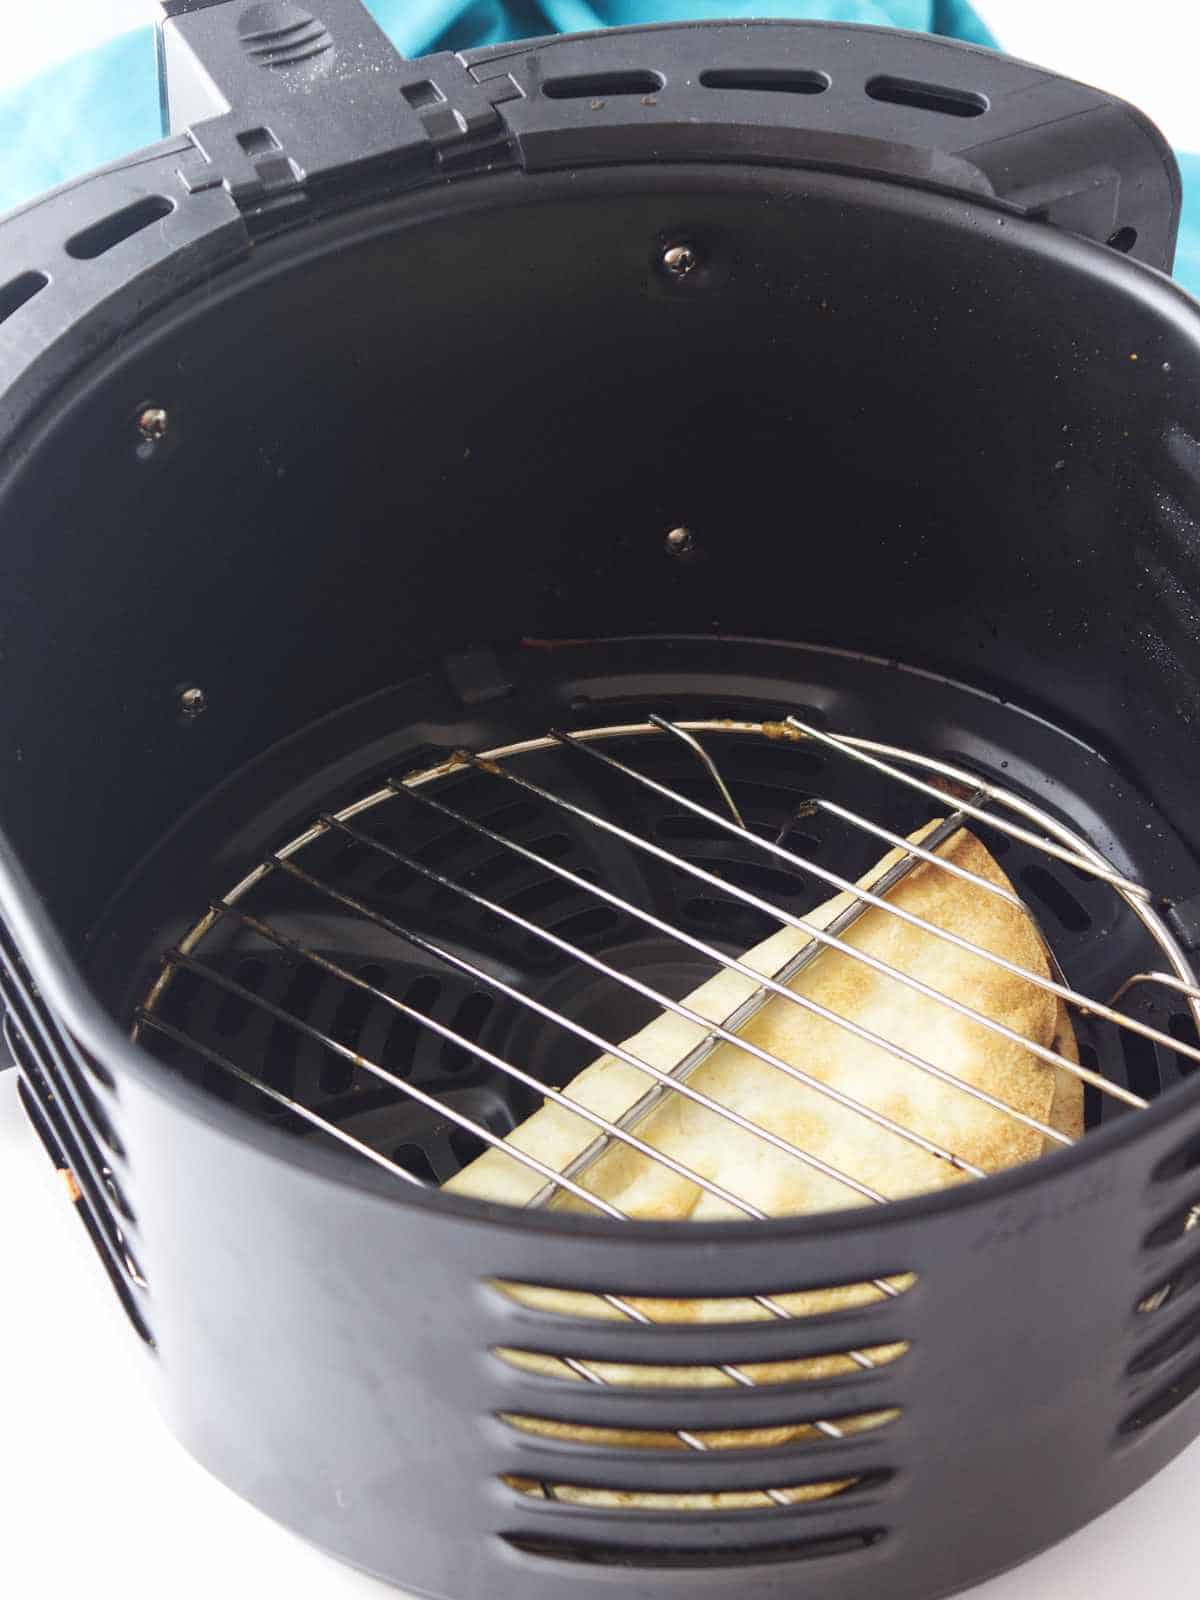 golden brown folded quesadilla in an air fryer with round rack as a weight.